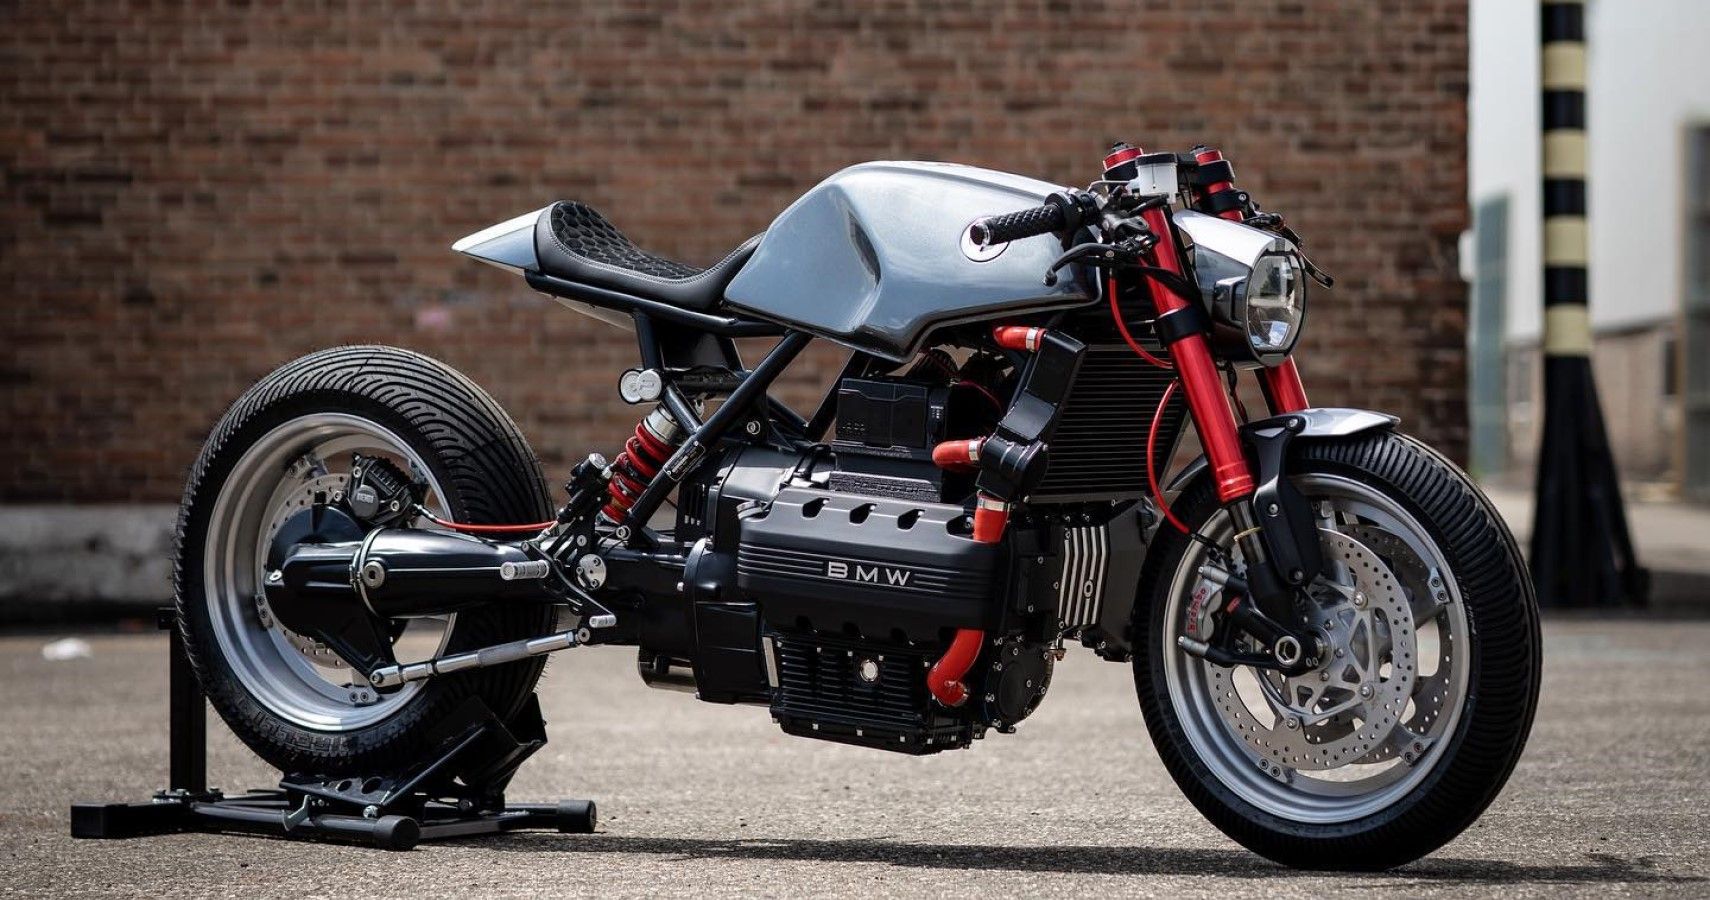 This Custom Bmw K1100 Rs Café Racer Loses Clothing, Goes Sharp And Savage